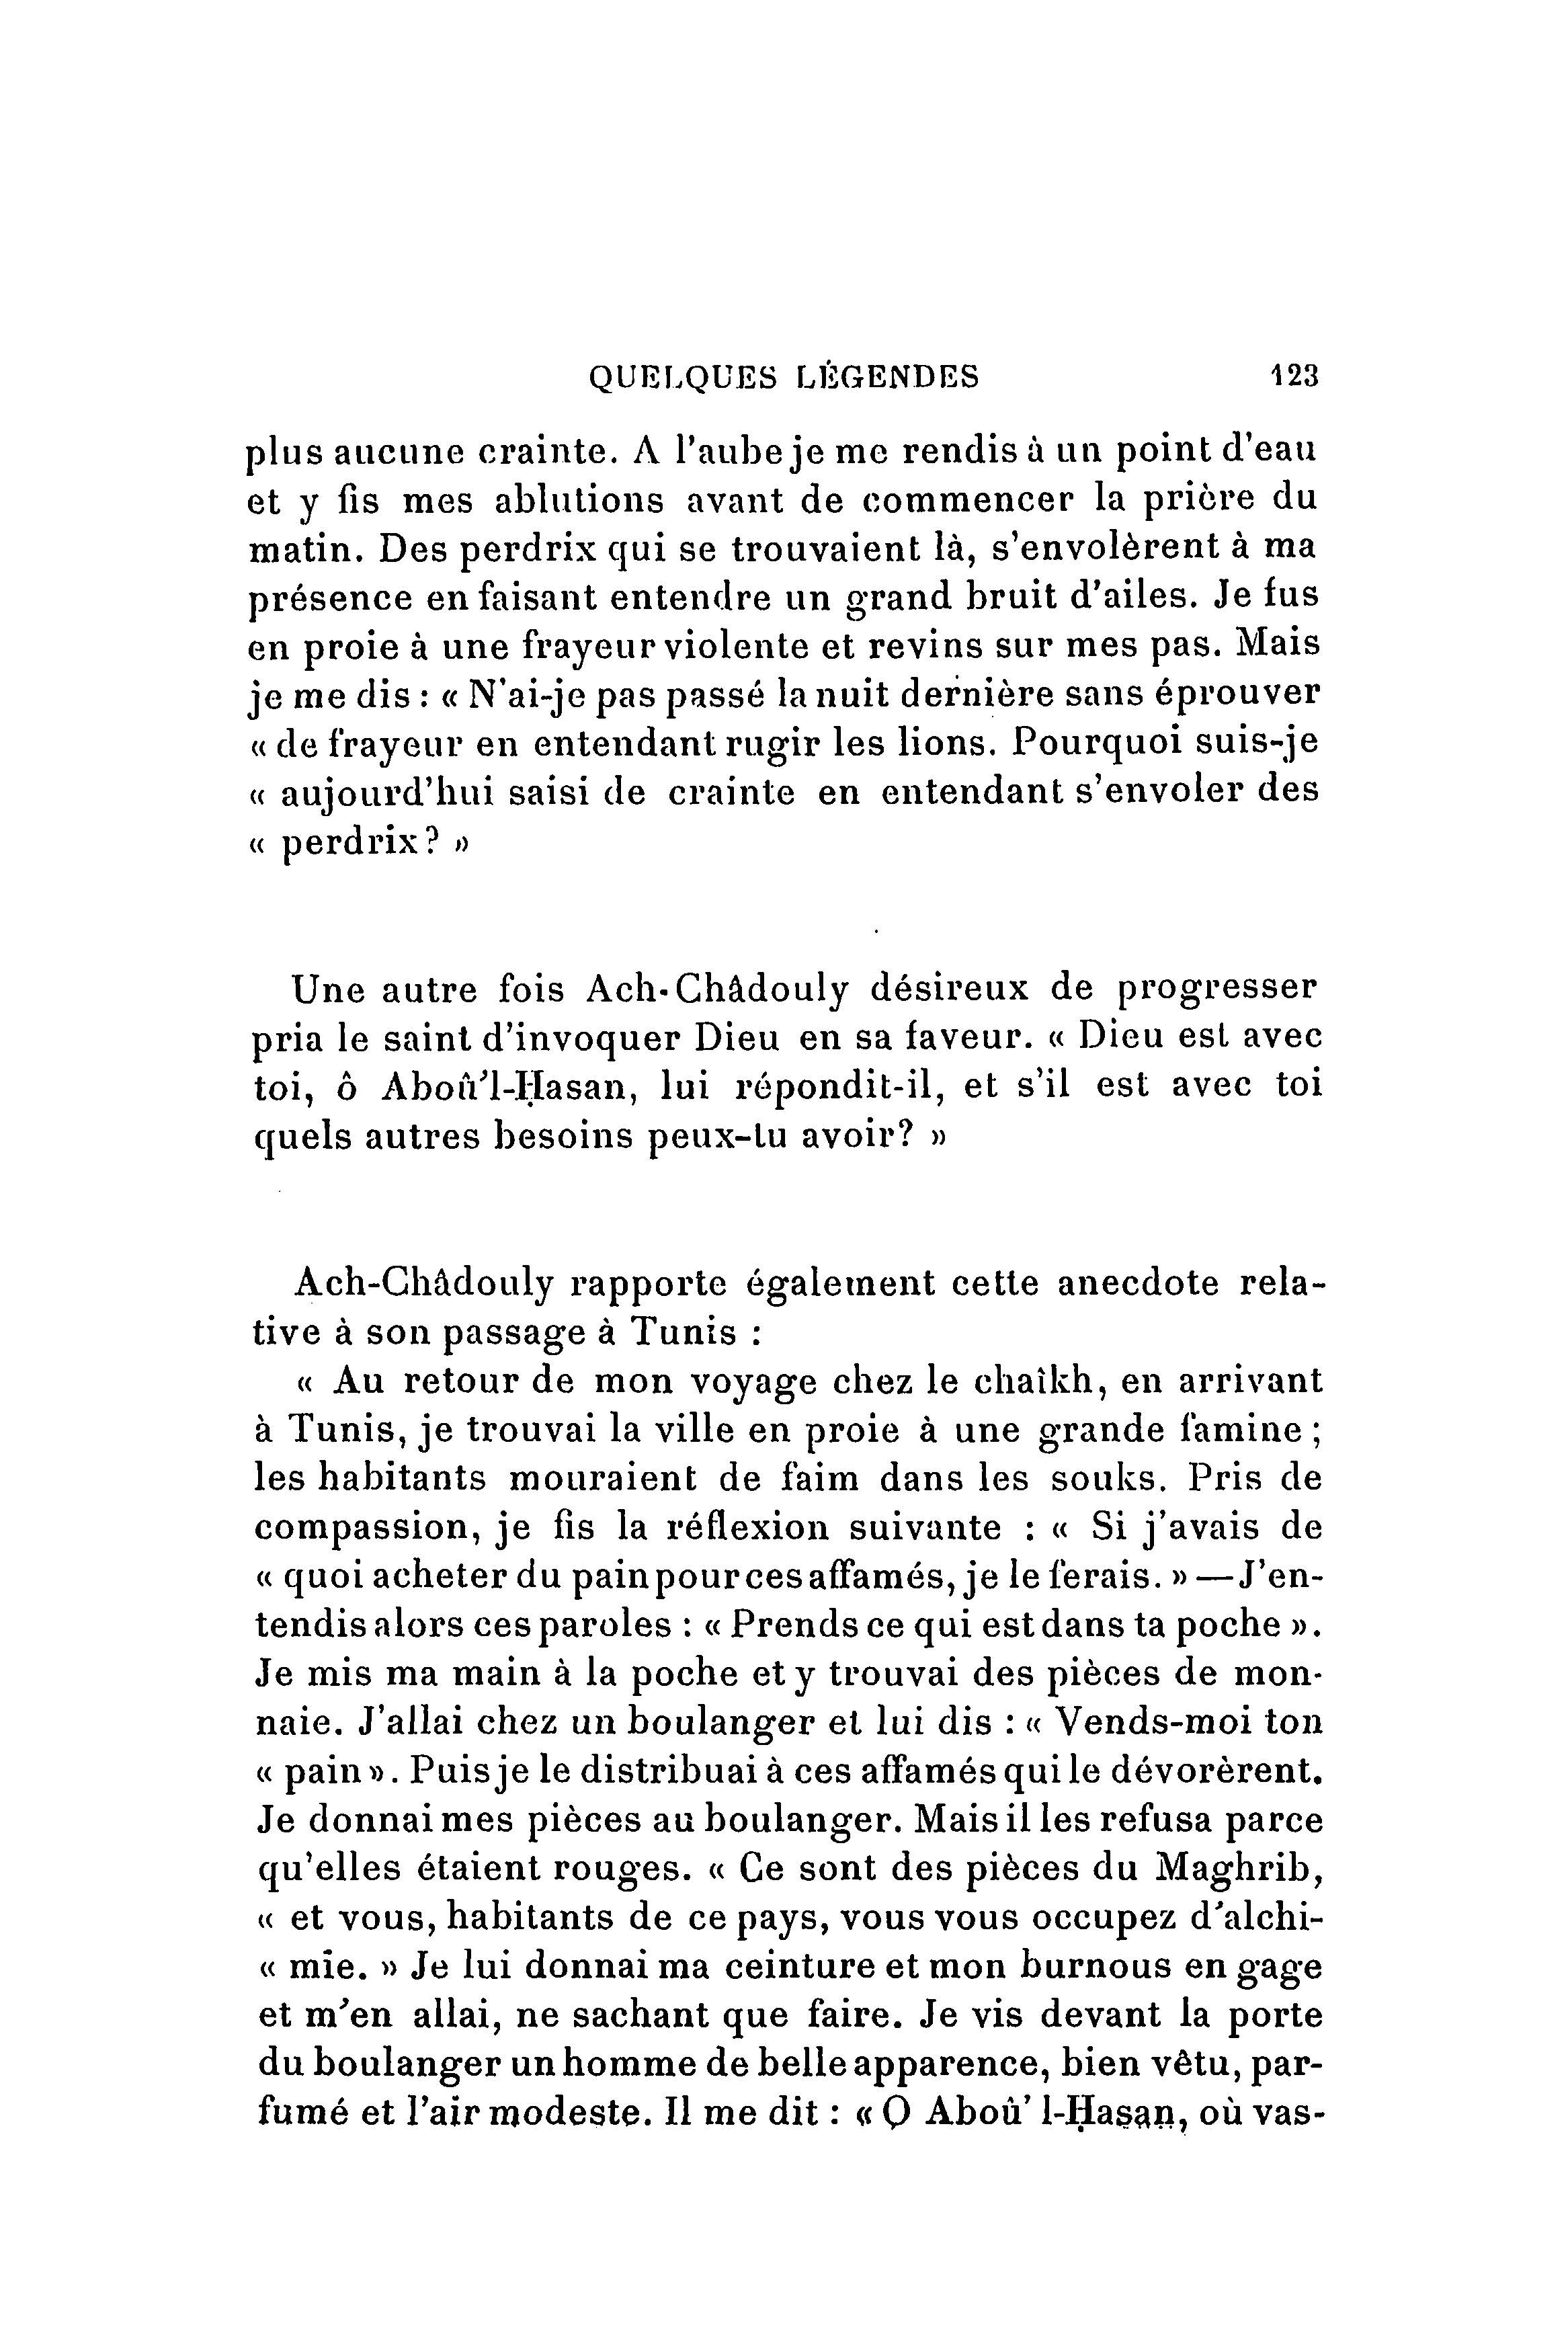 archives-marocaines-volume-03-1905_page_130